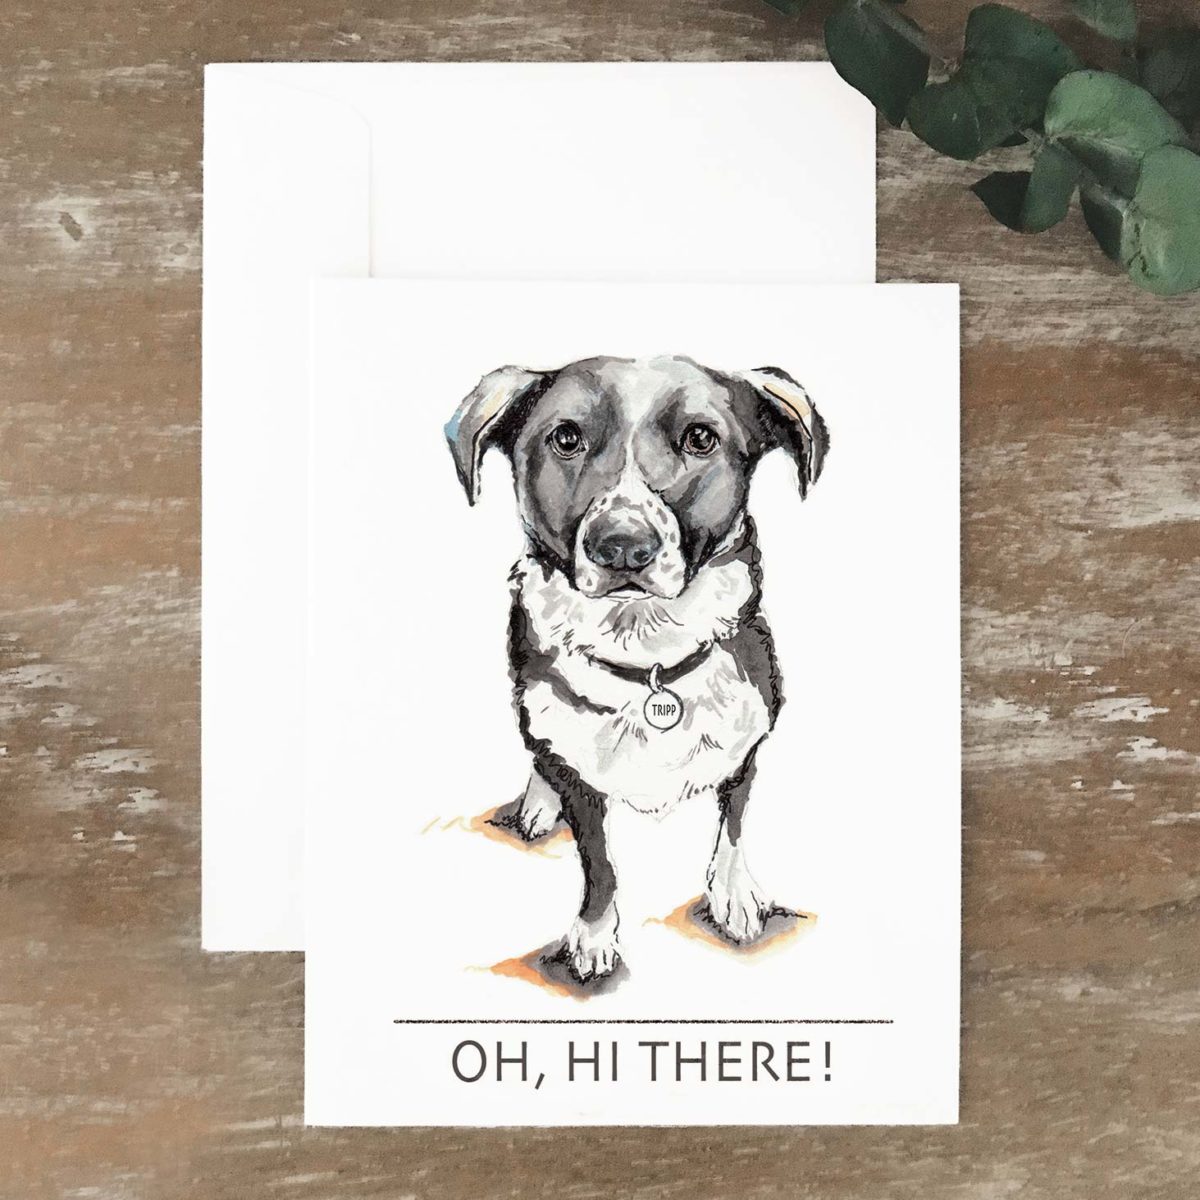 A2 greeting cards of a black and white dog named Tripp